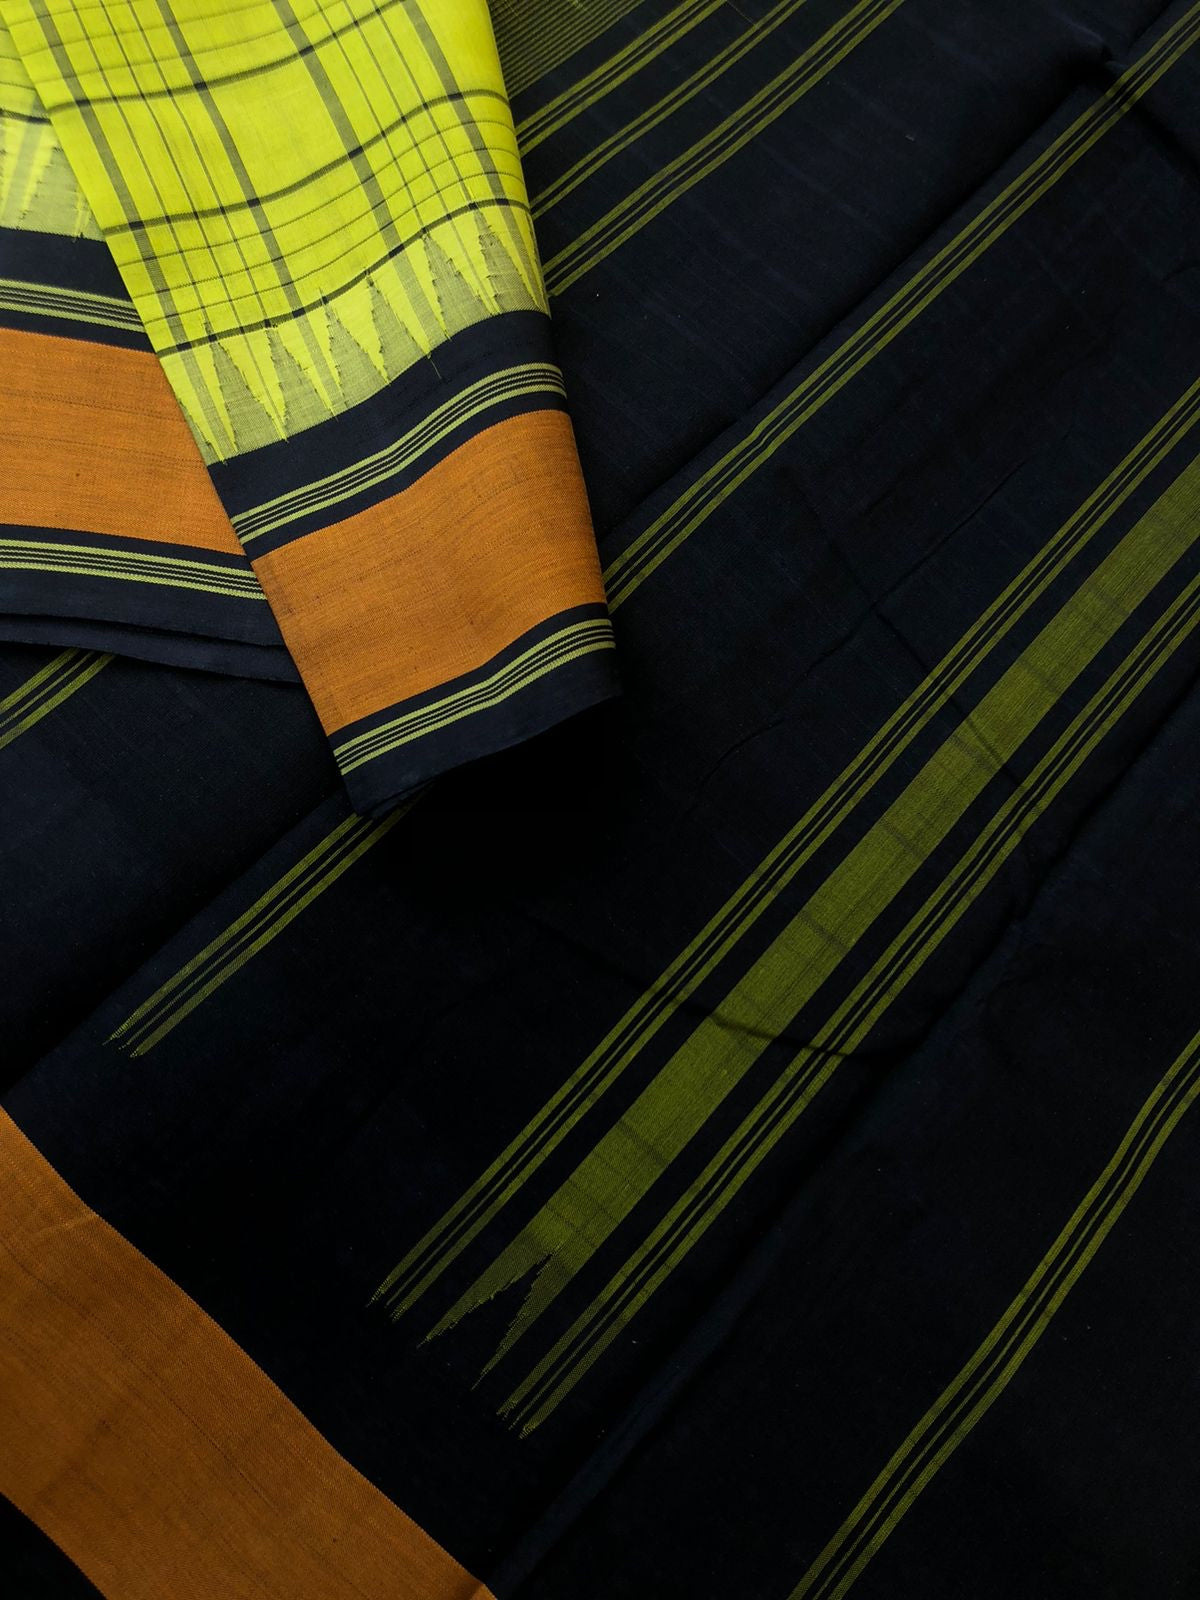 Signature Korvai Silk Cottons - beautiful green and black with chocolate brown borders